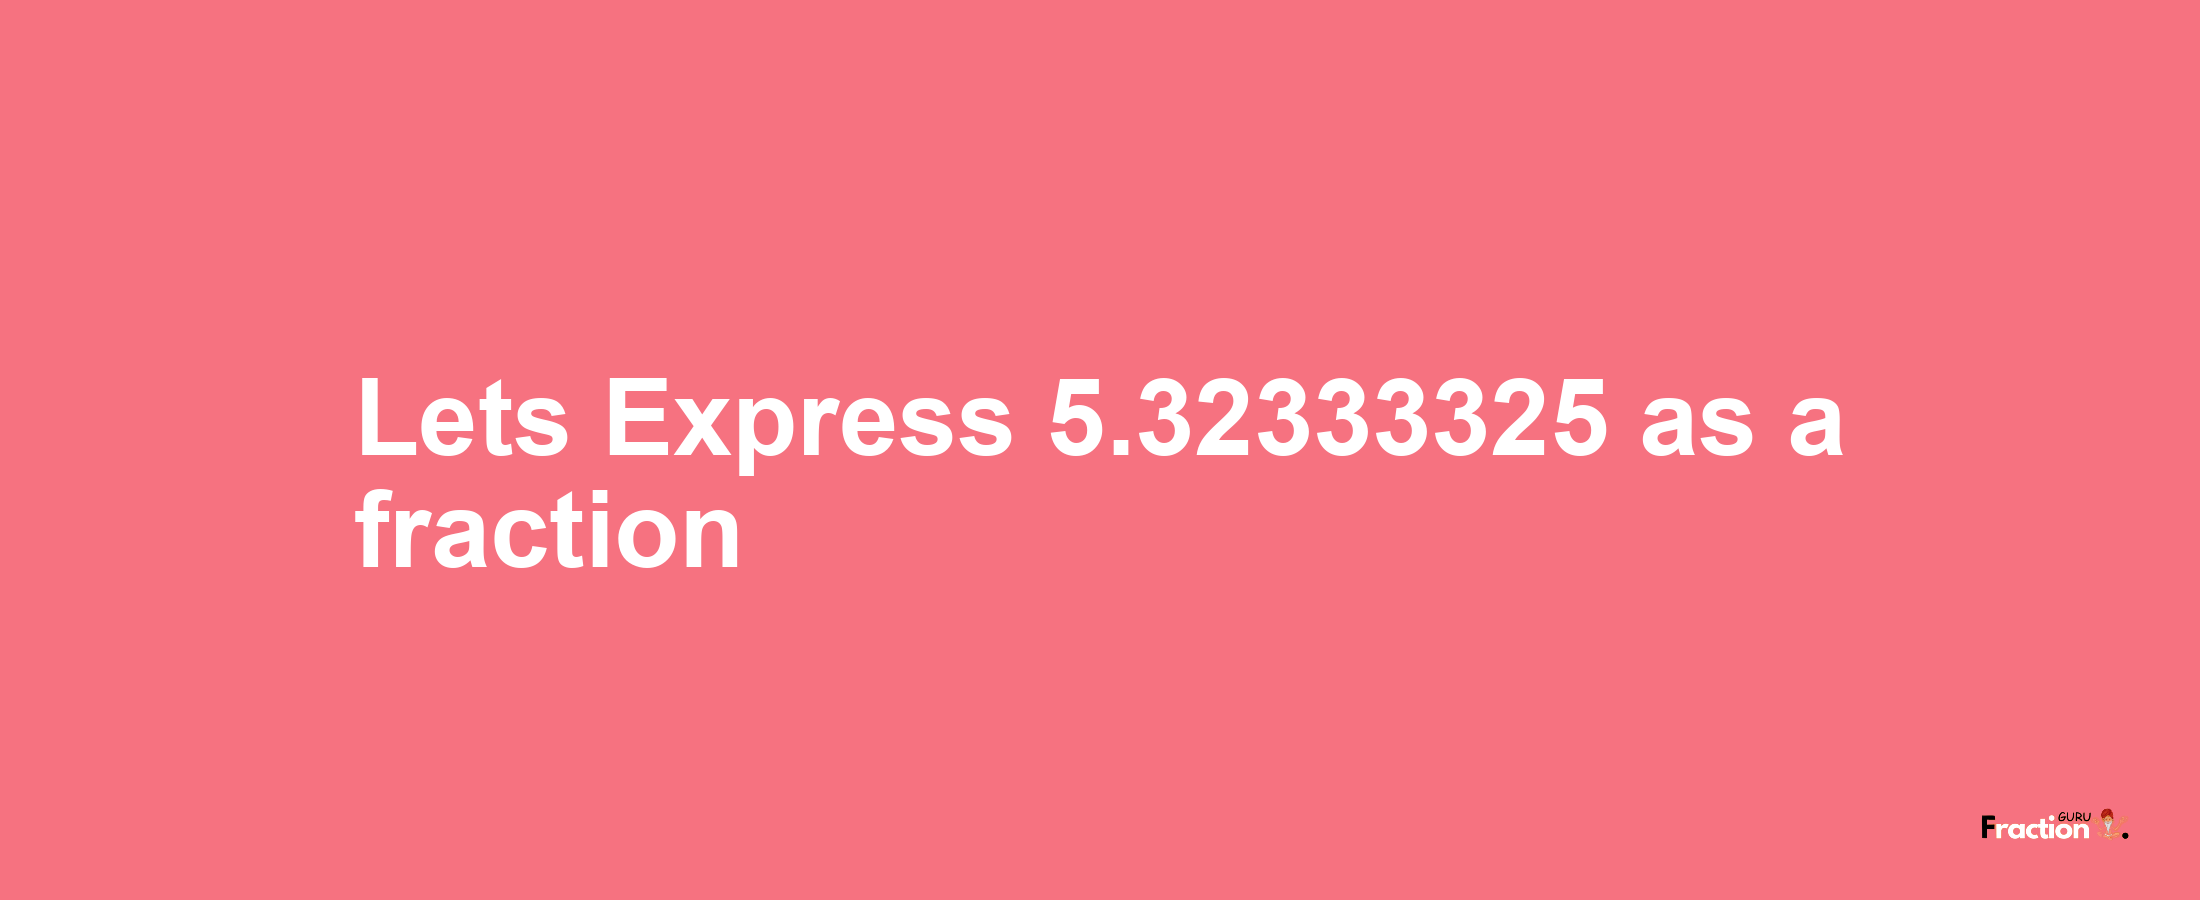 Lets Express 5.32333325 as afraction